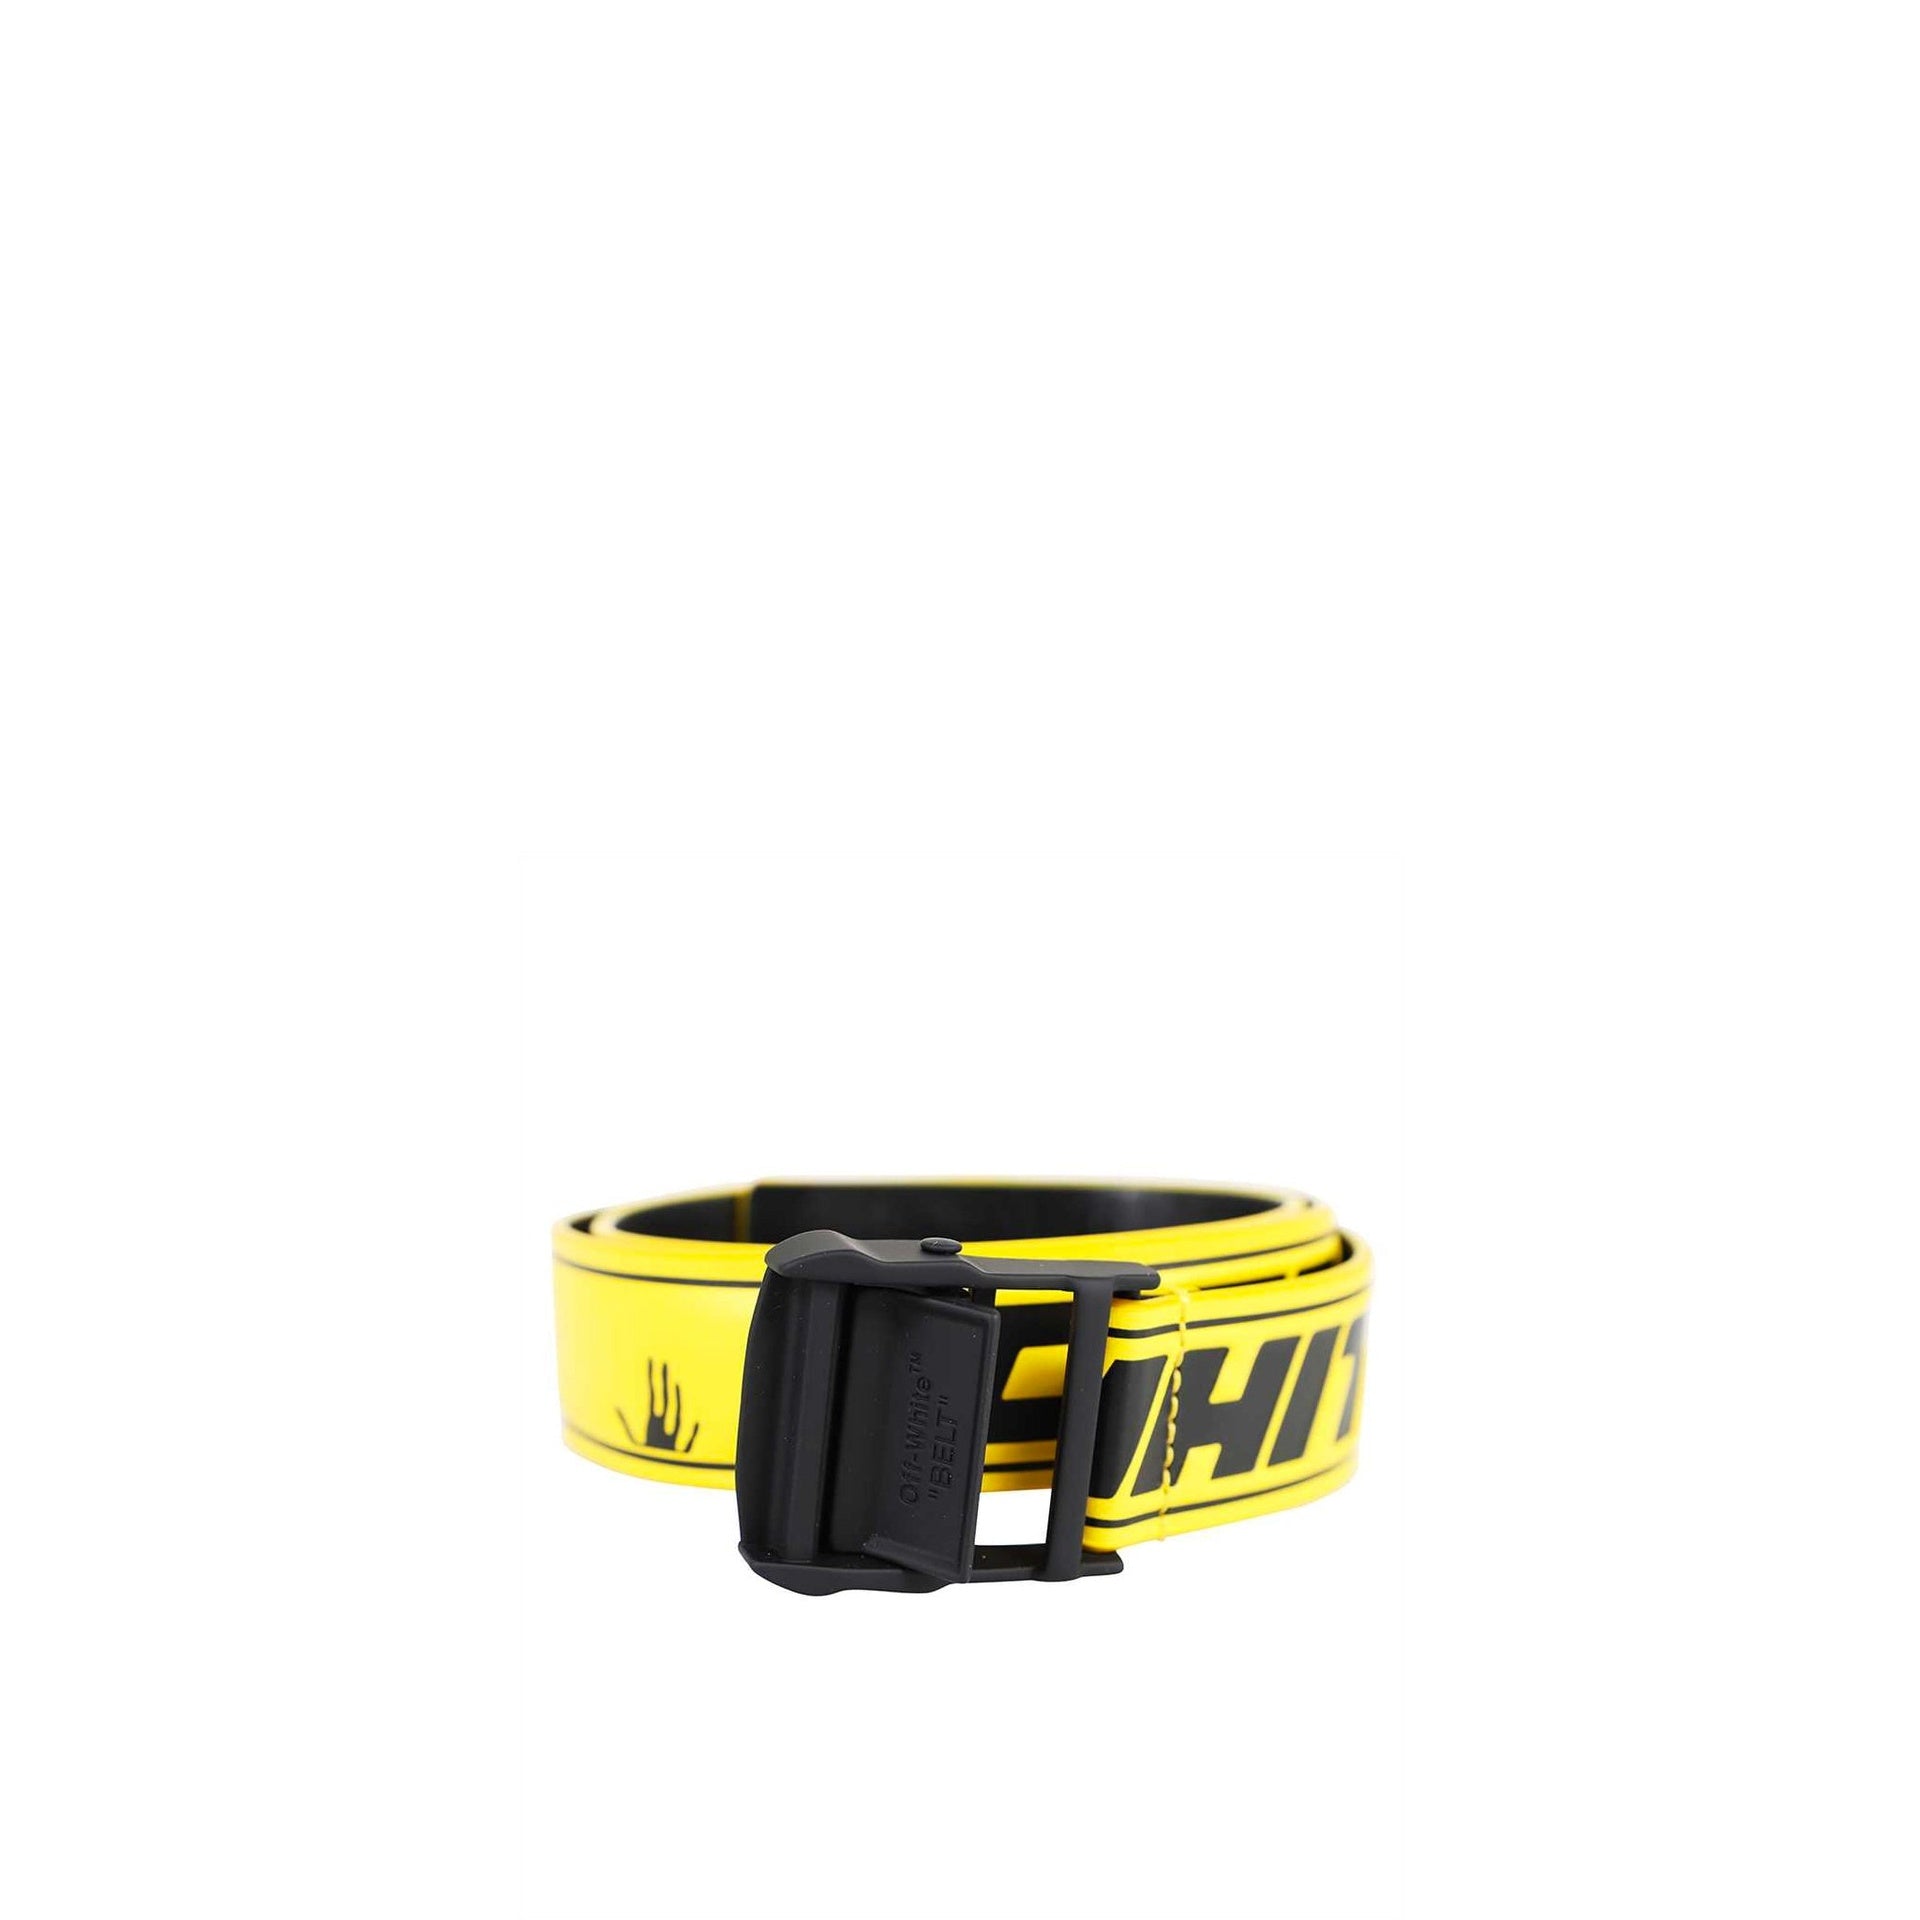 OFF-WHITE-OUTLET-SALE-Off-White-Leather-Belt-Gurtel-YELLOW-S-M-ARCHIVE-COLLECTION.jpg